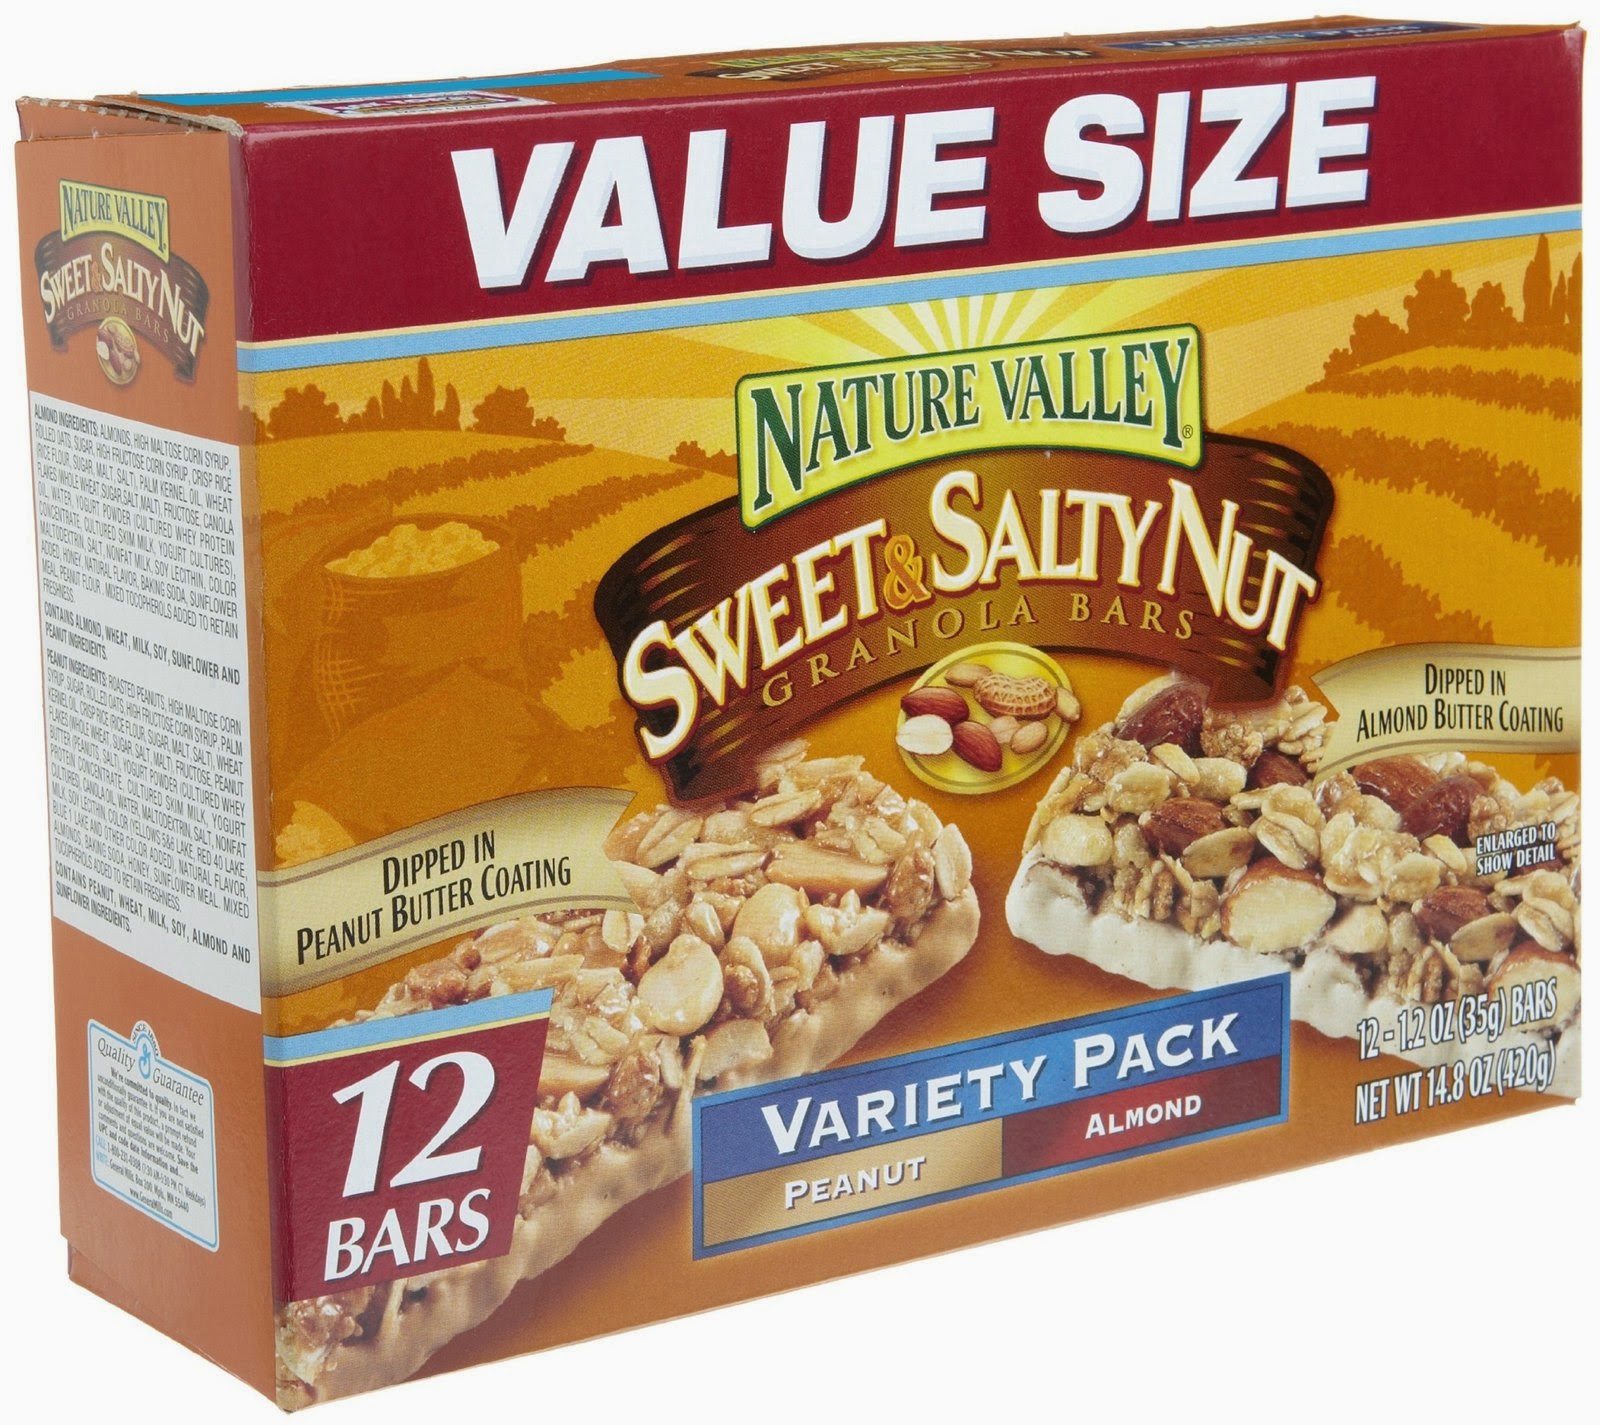 healthy-nature-valley-granola-bars-nature-valley-sweet-and-salty